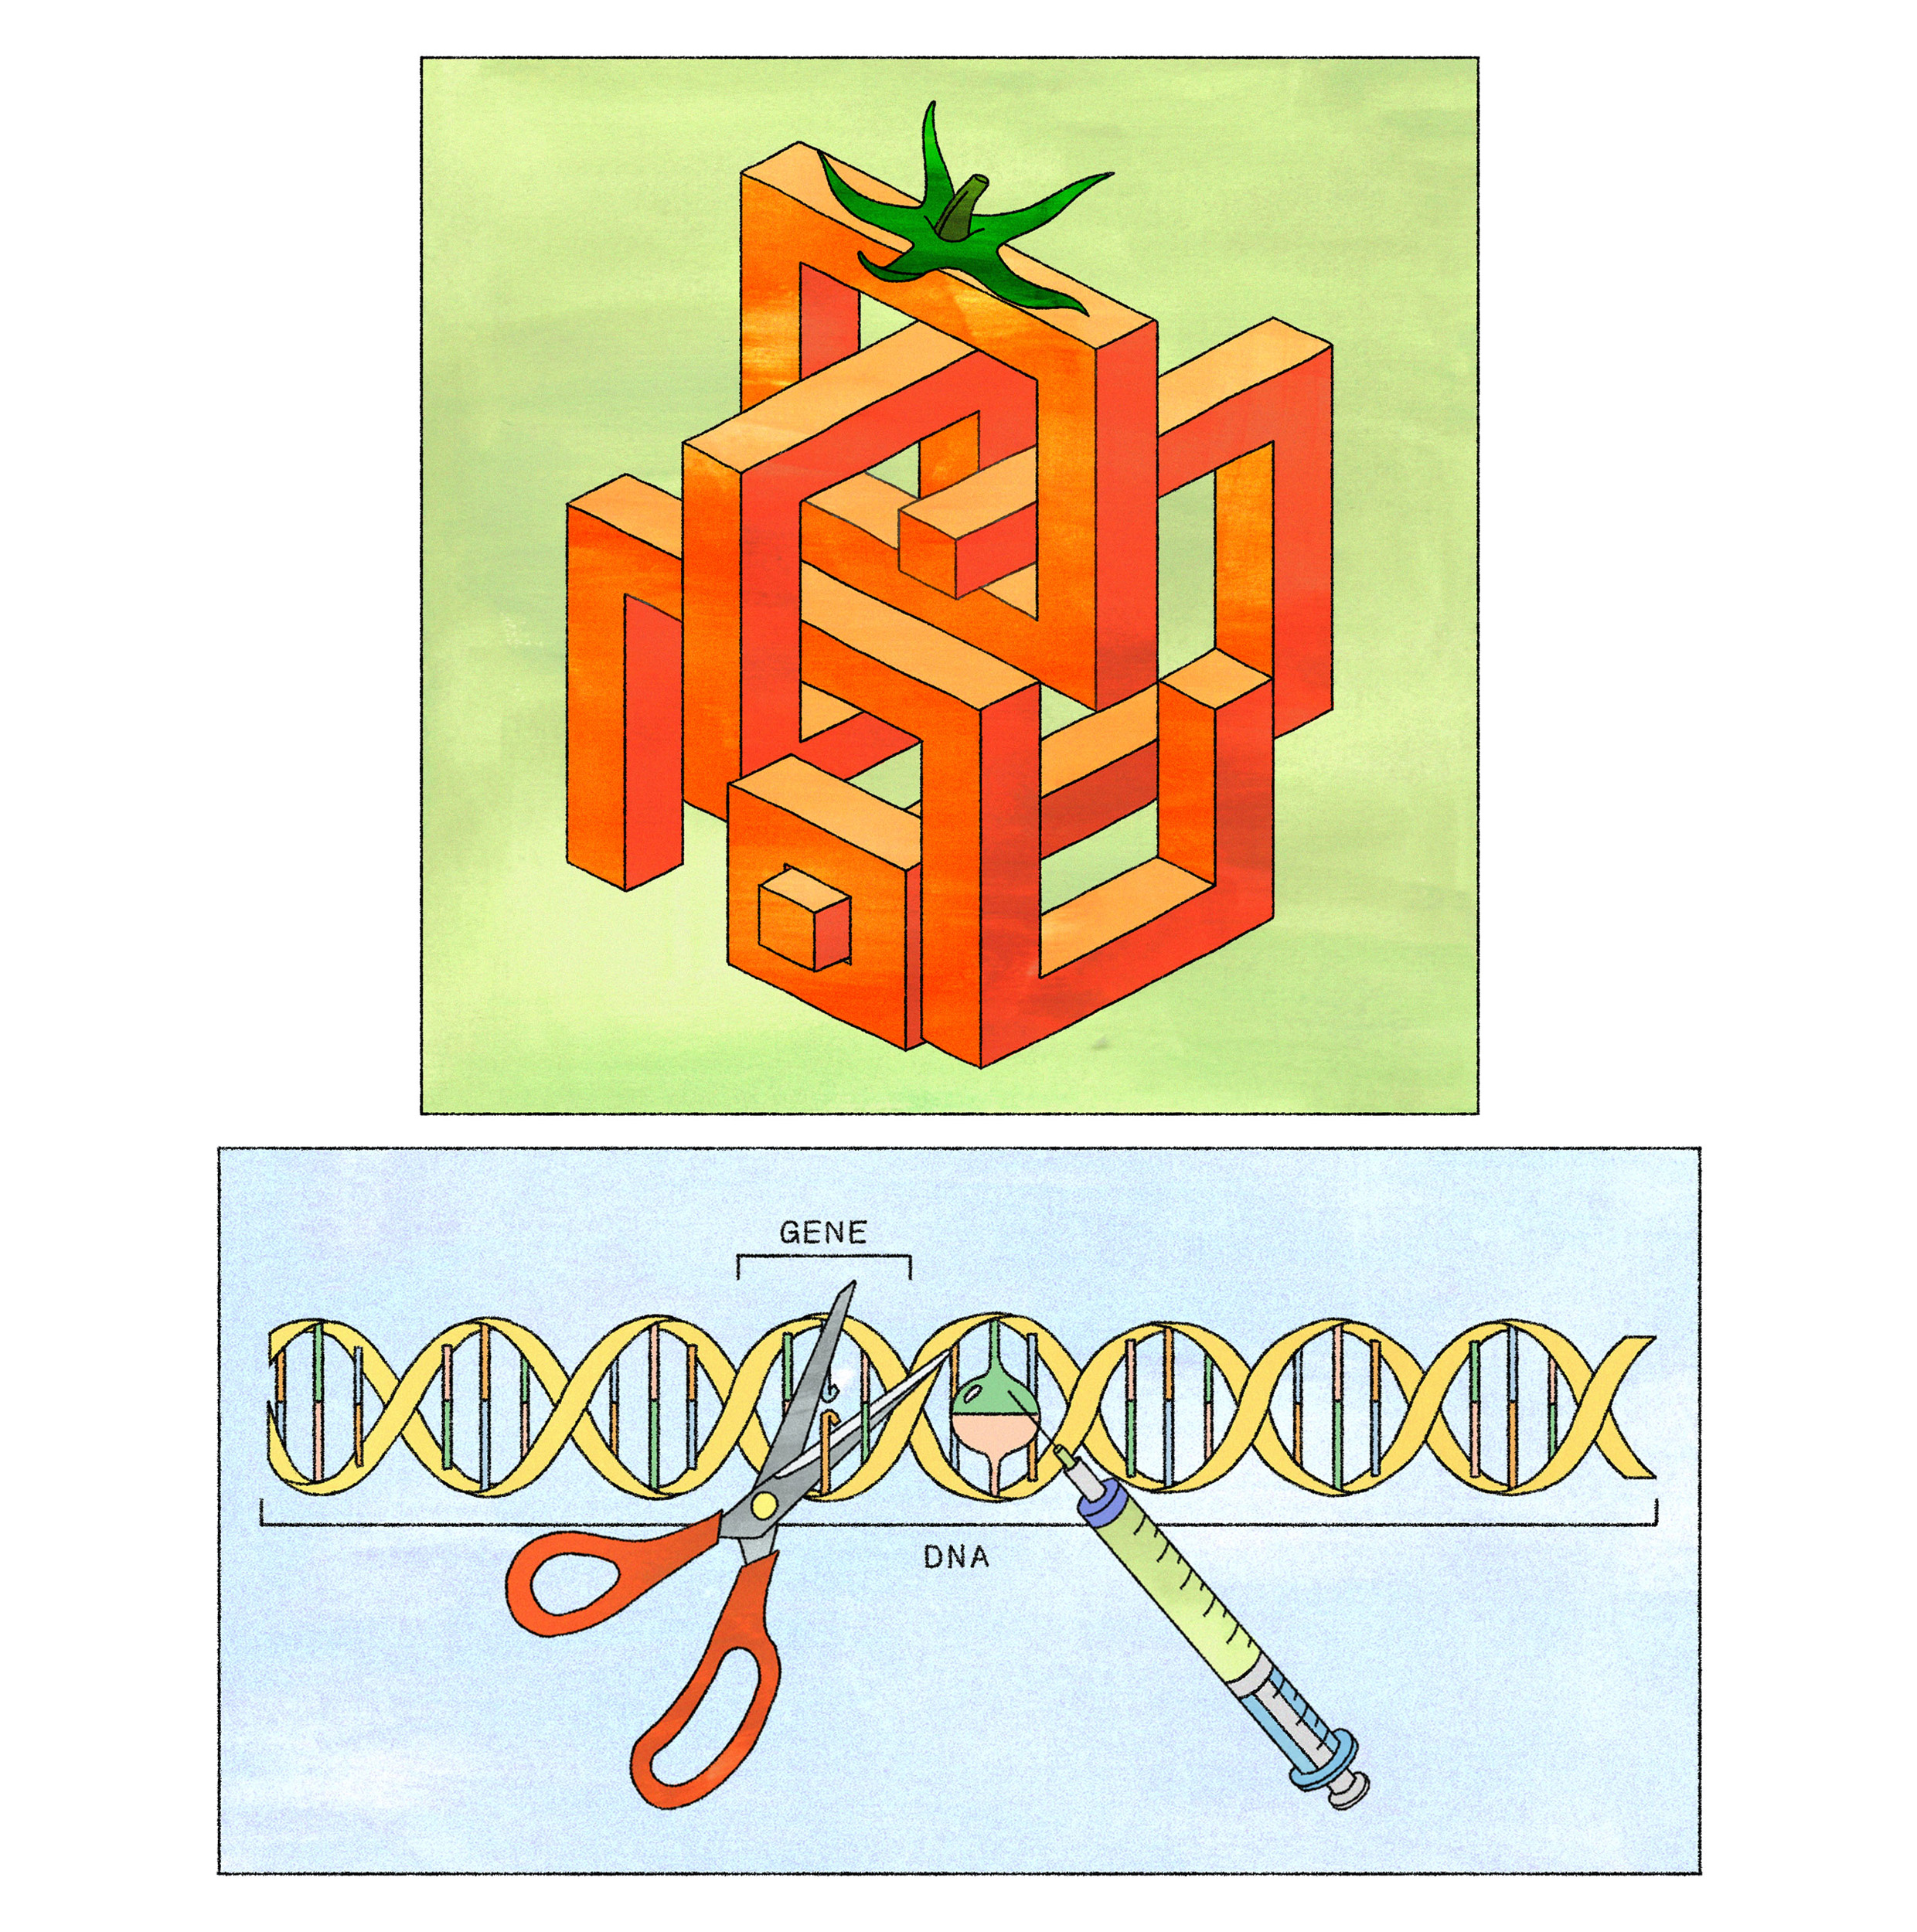 Illustration work by Becca Blake showing an isometric tomato and a strand of DNA being edited.